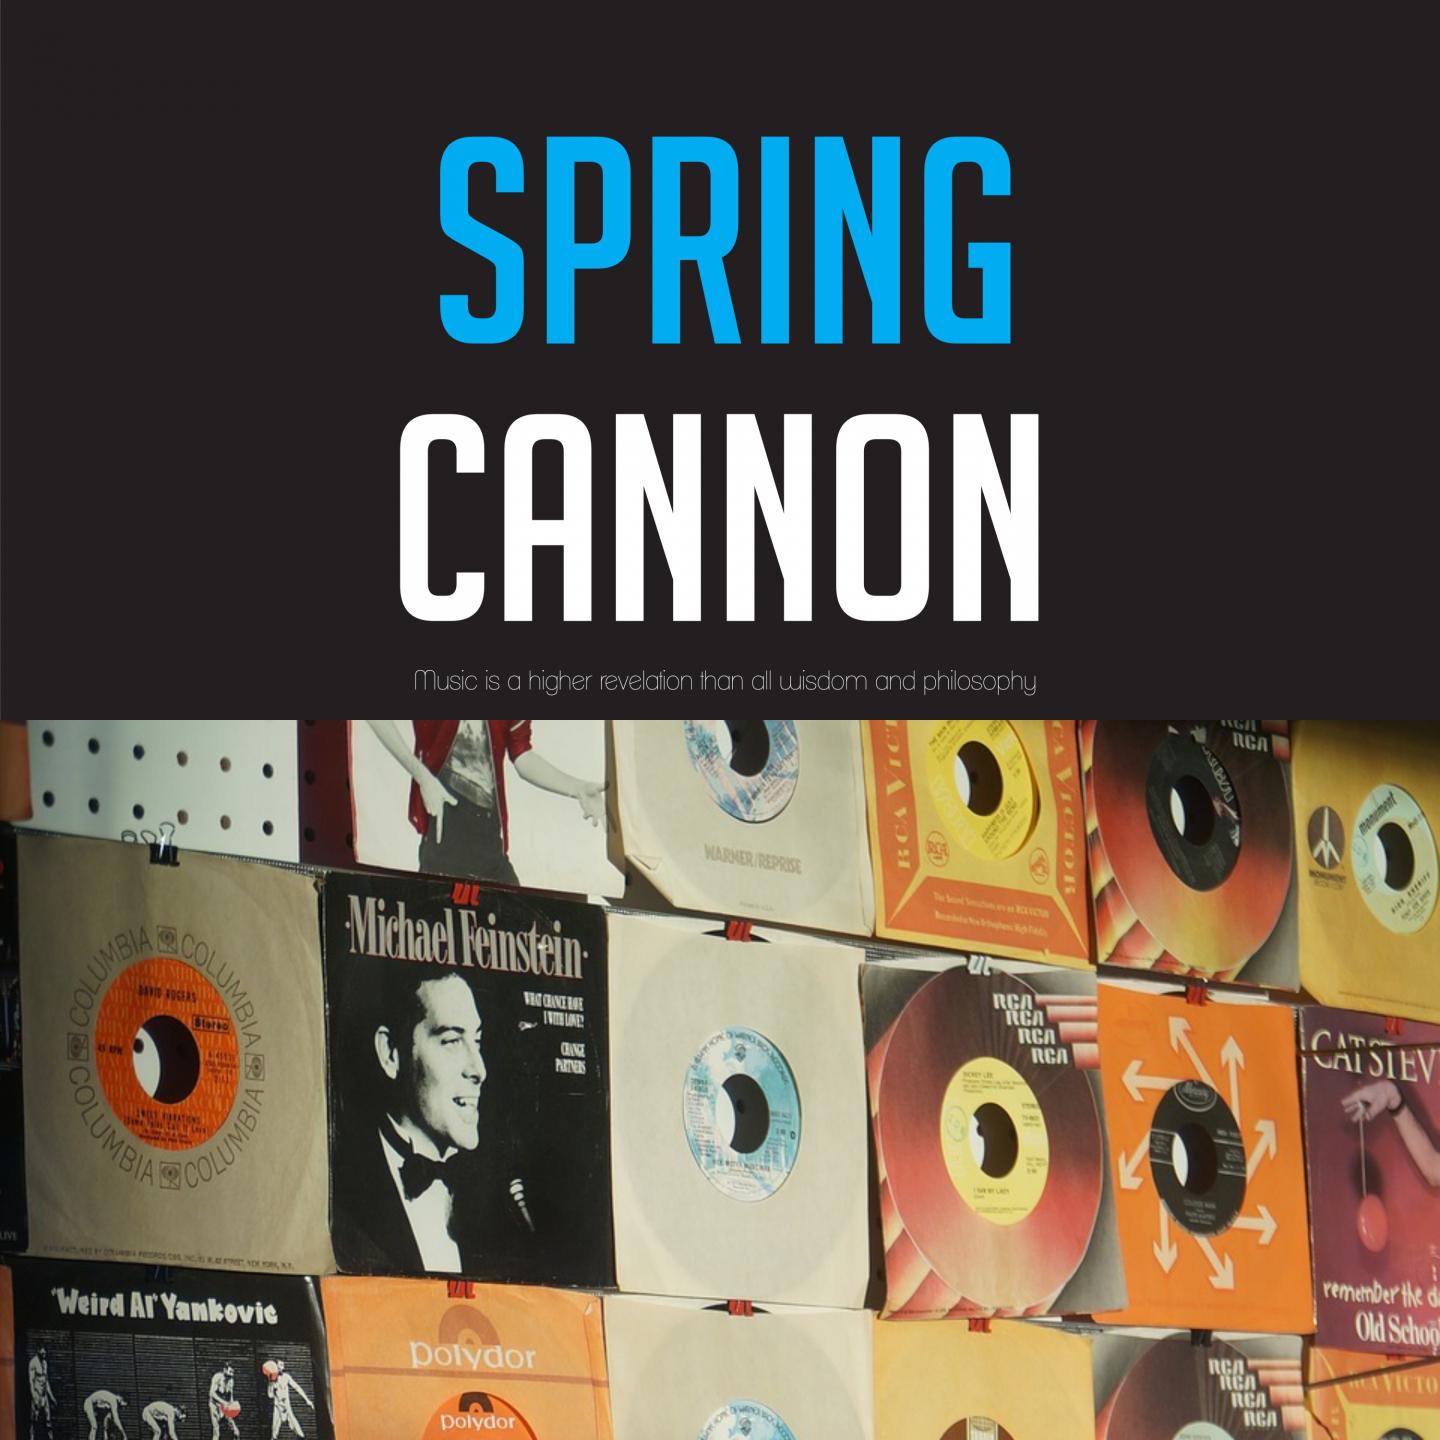 Spring Cannon